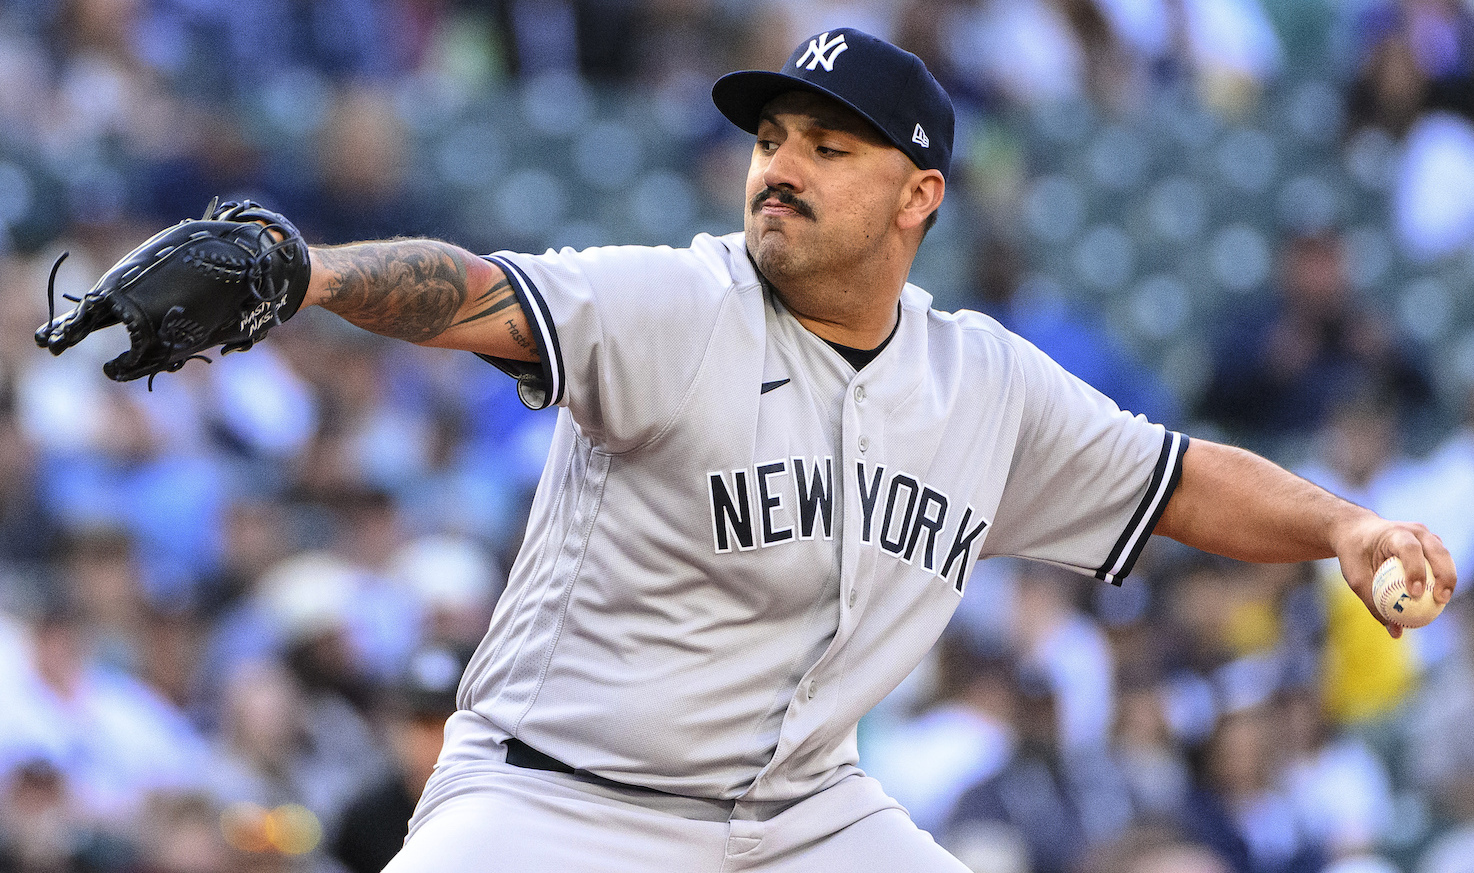 MLB fans annoyed with Yankees pitcher Nestor Cortes wearing Mario